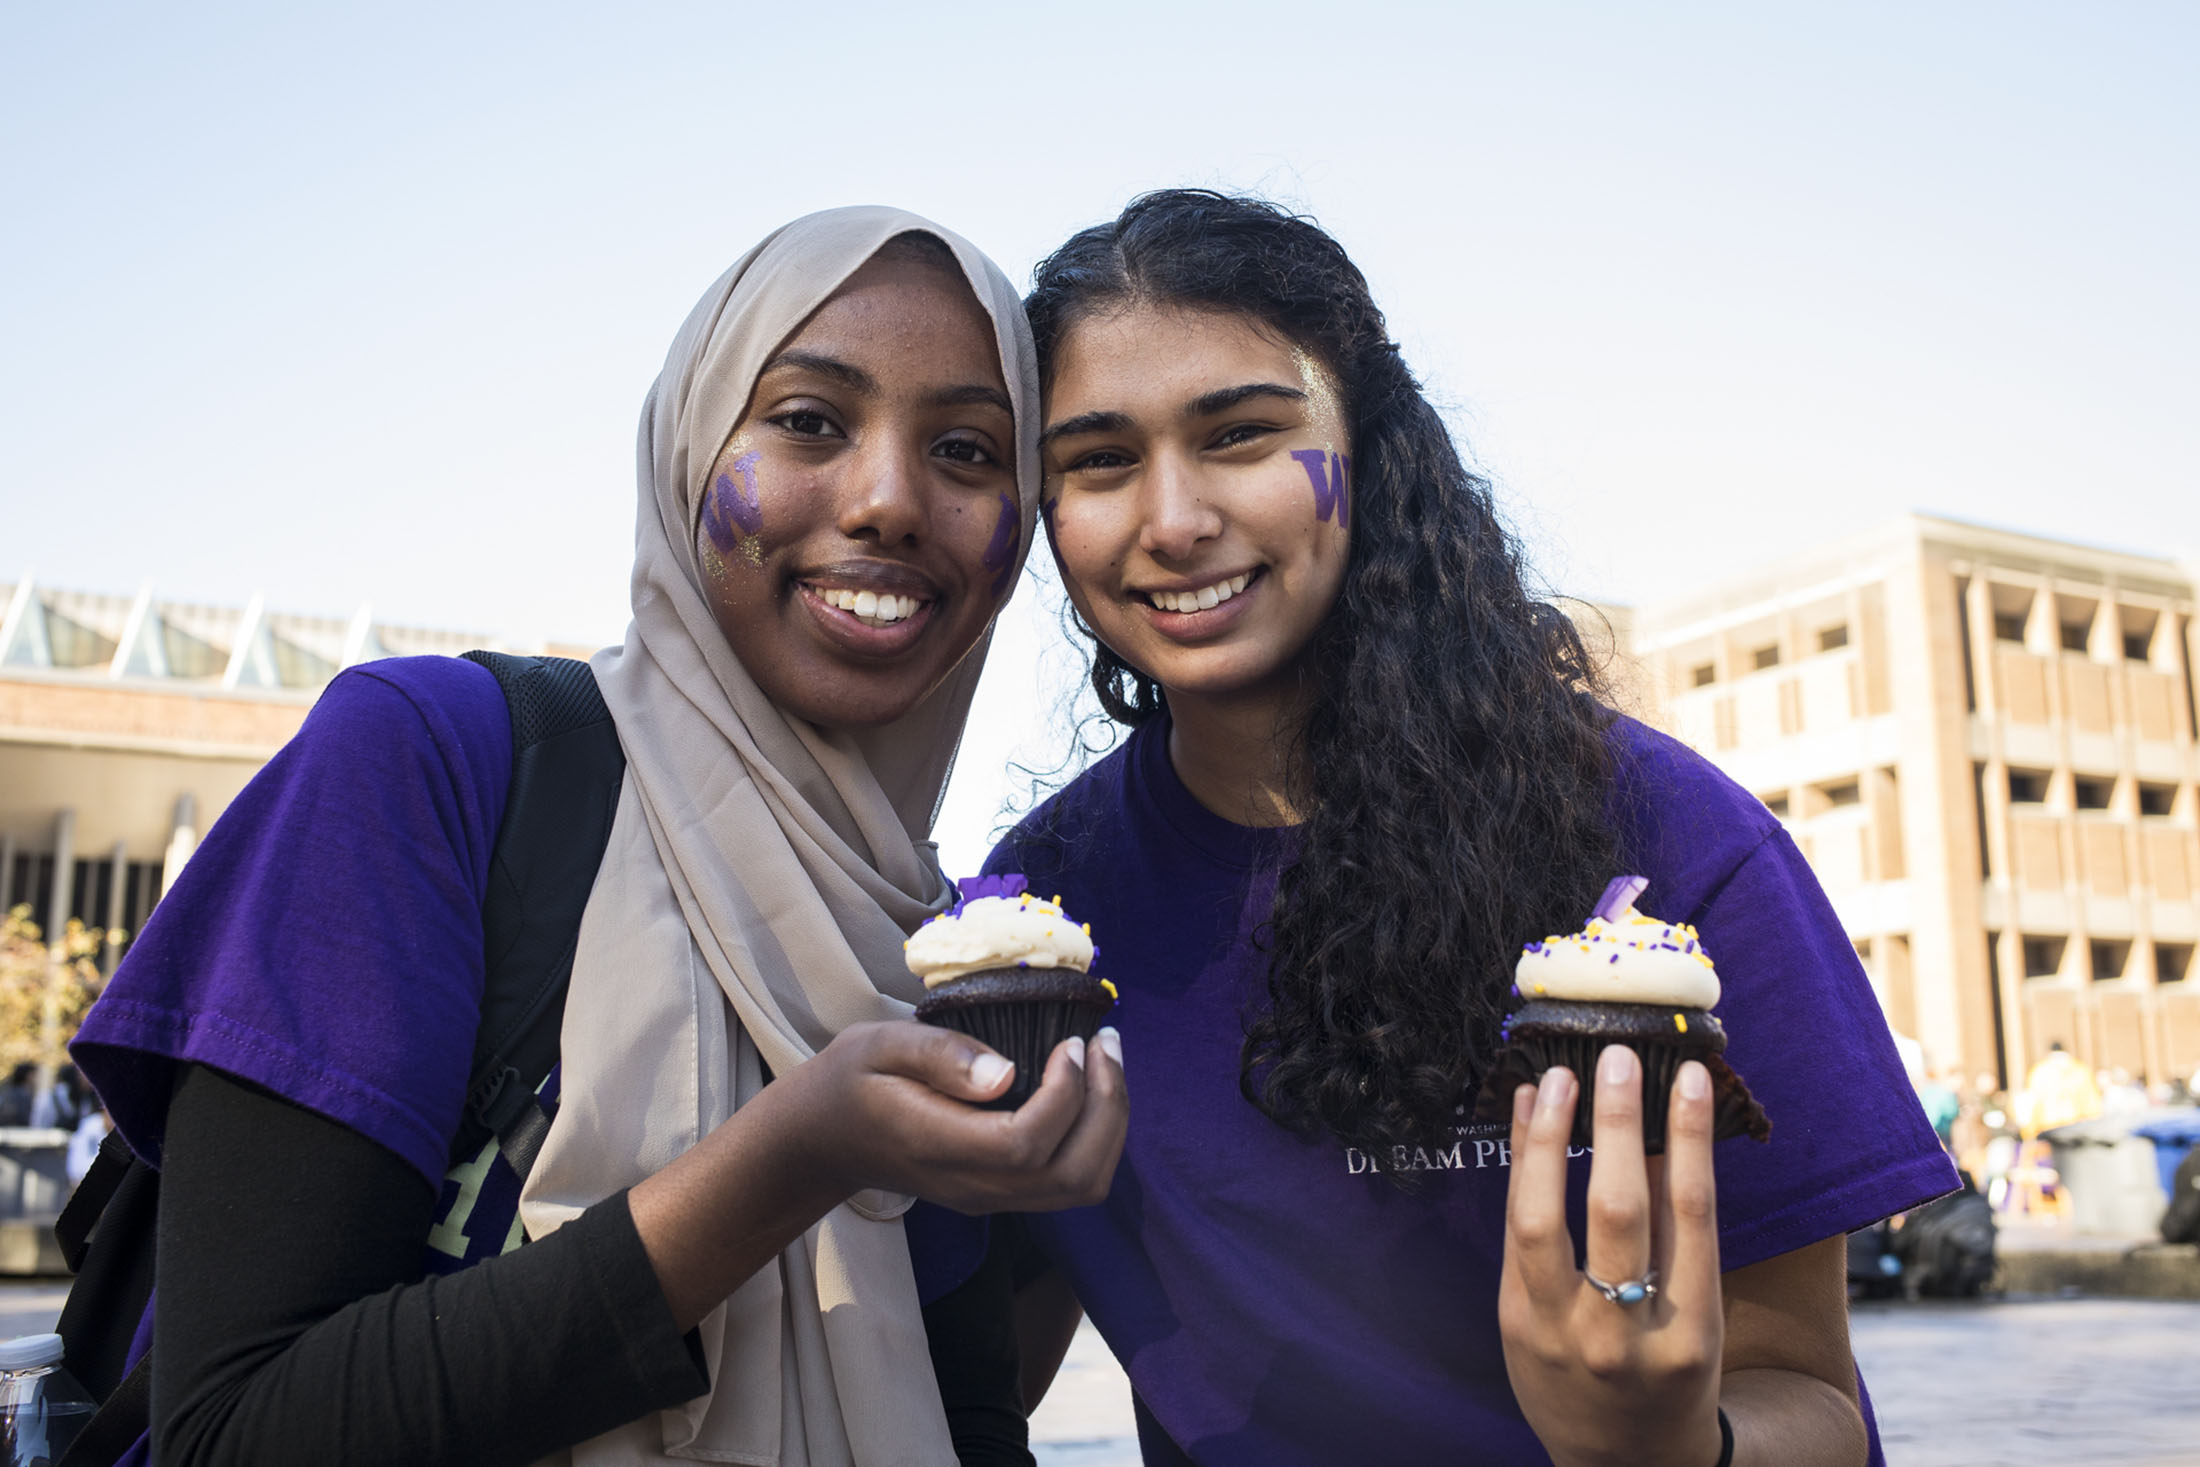 Two UW Students holding cupcakes in Red Square